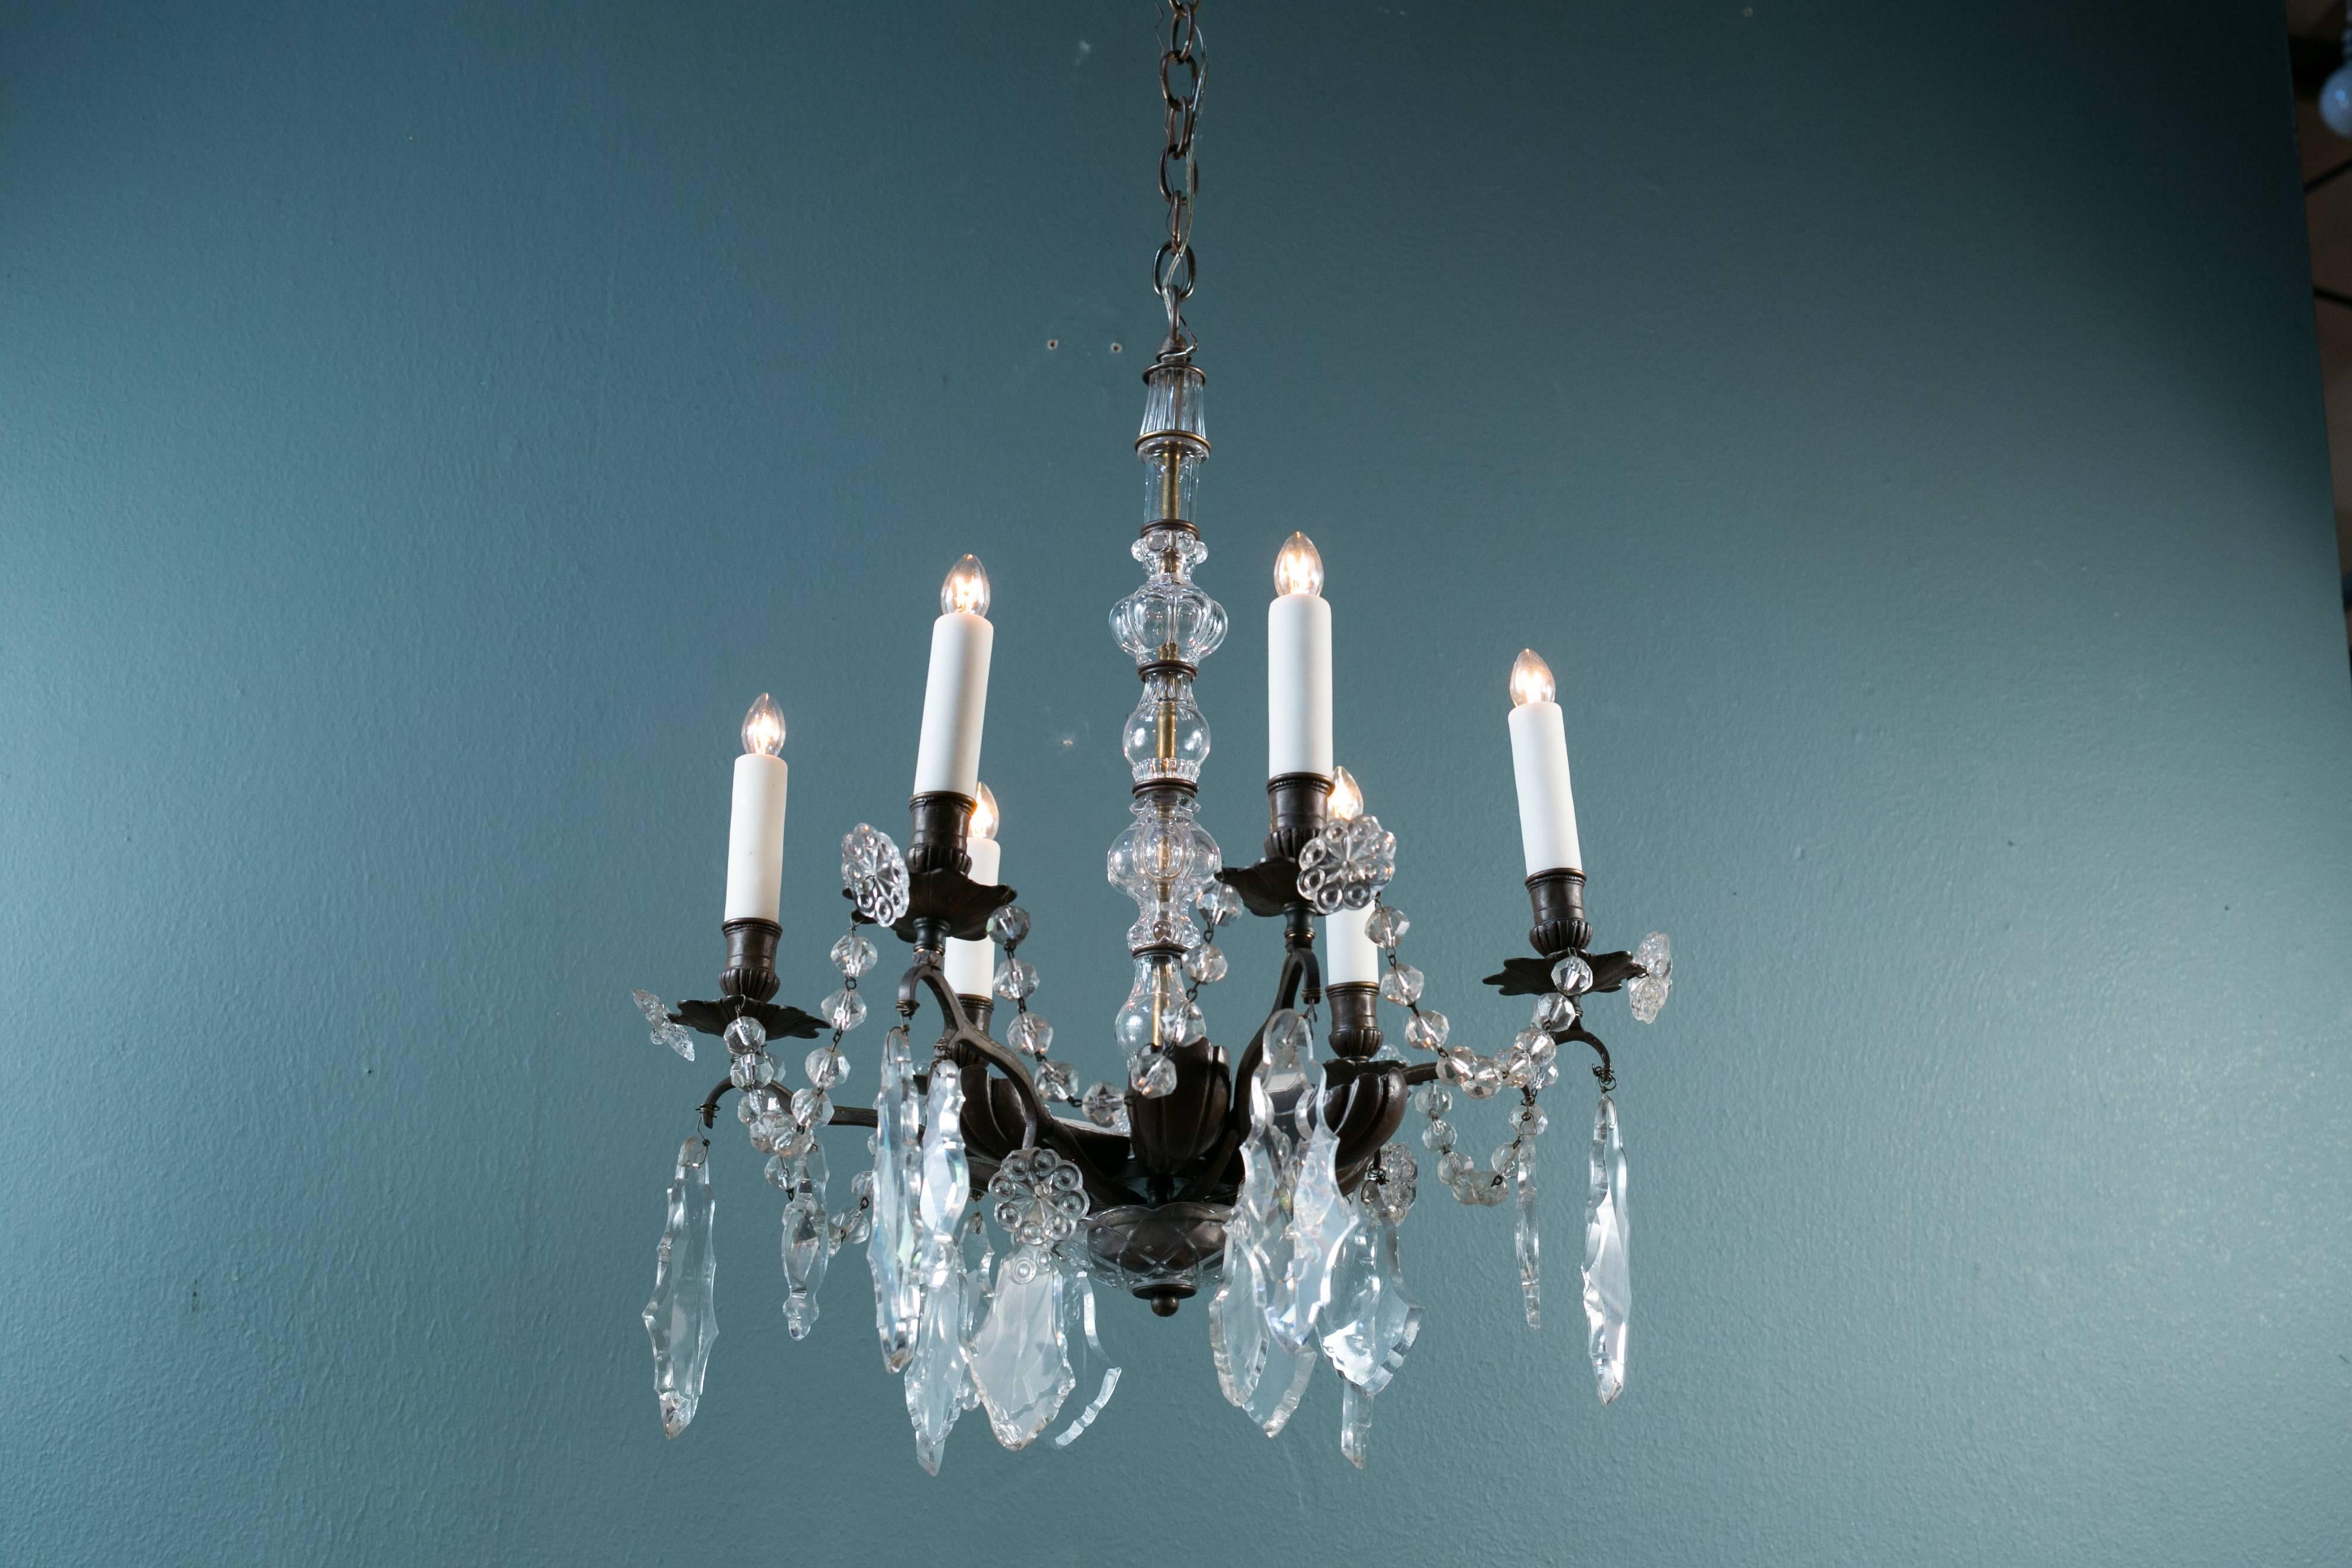 Cast Bronze and Crystal Chandelier from France, circa 1890